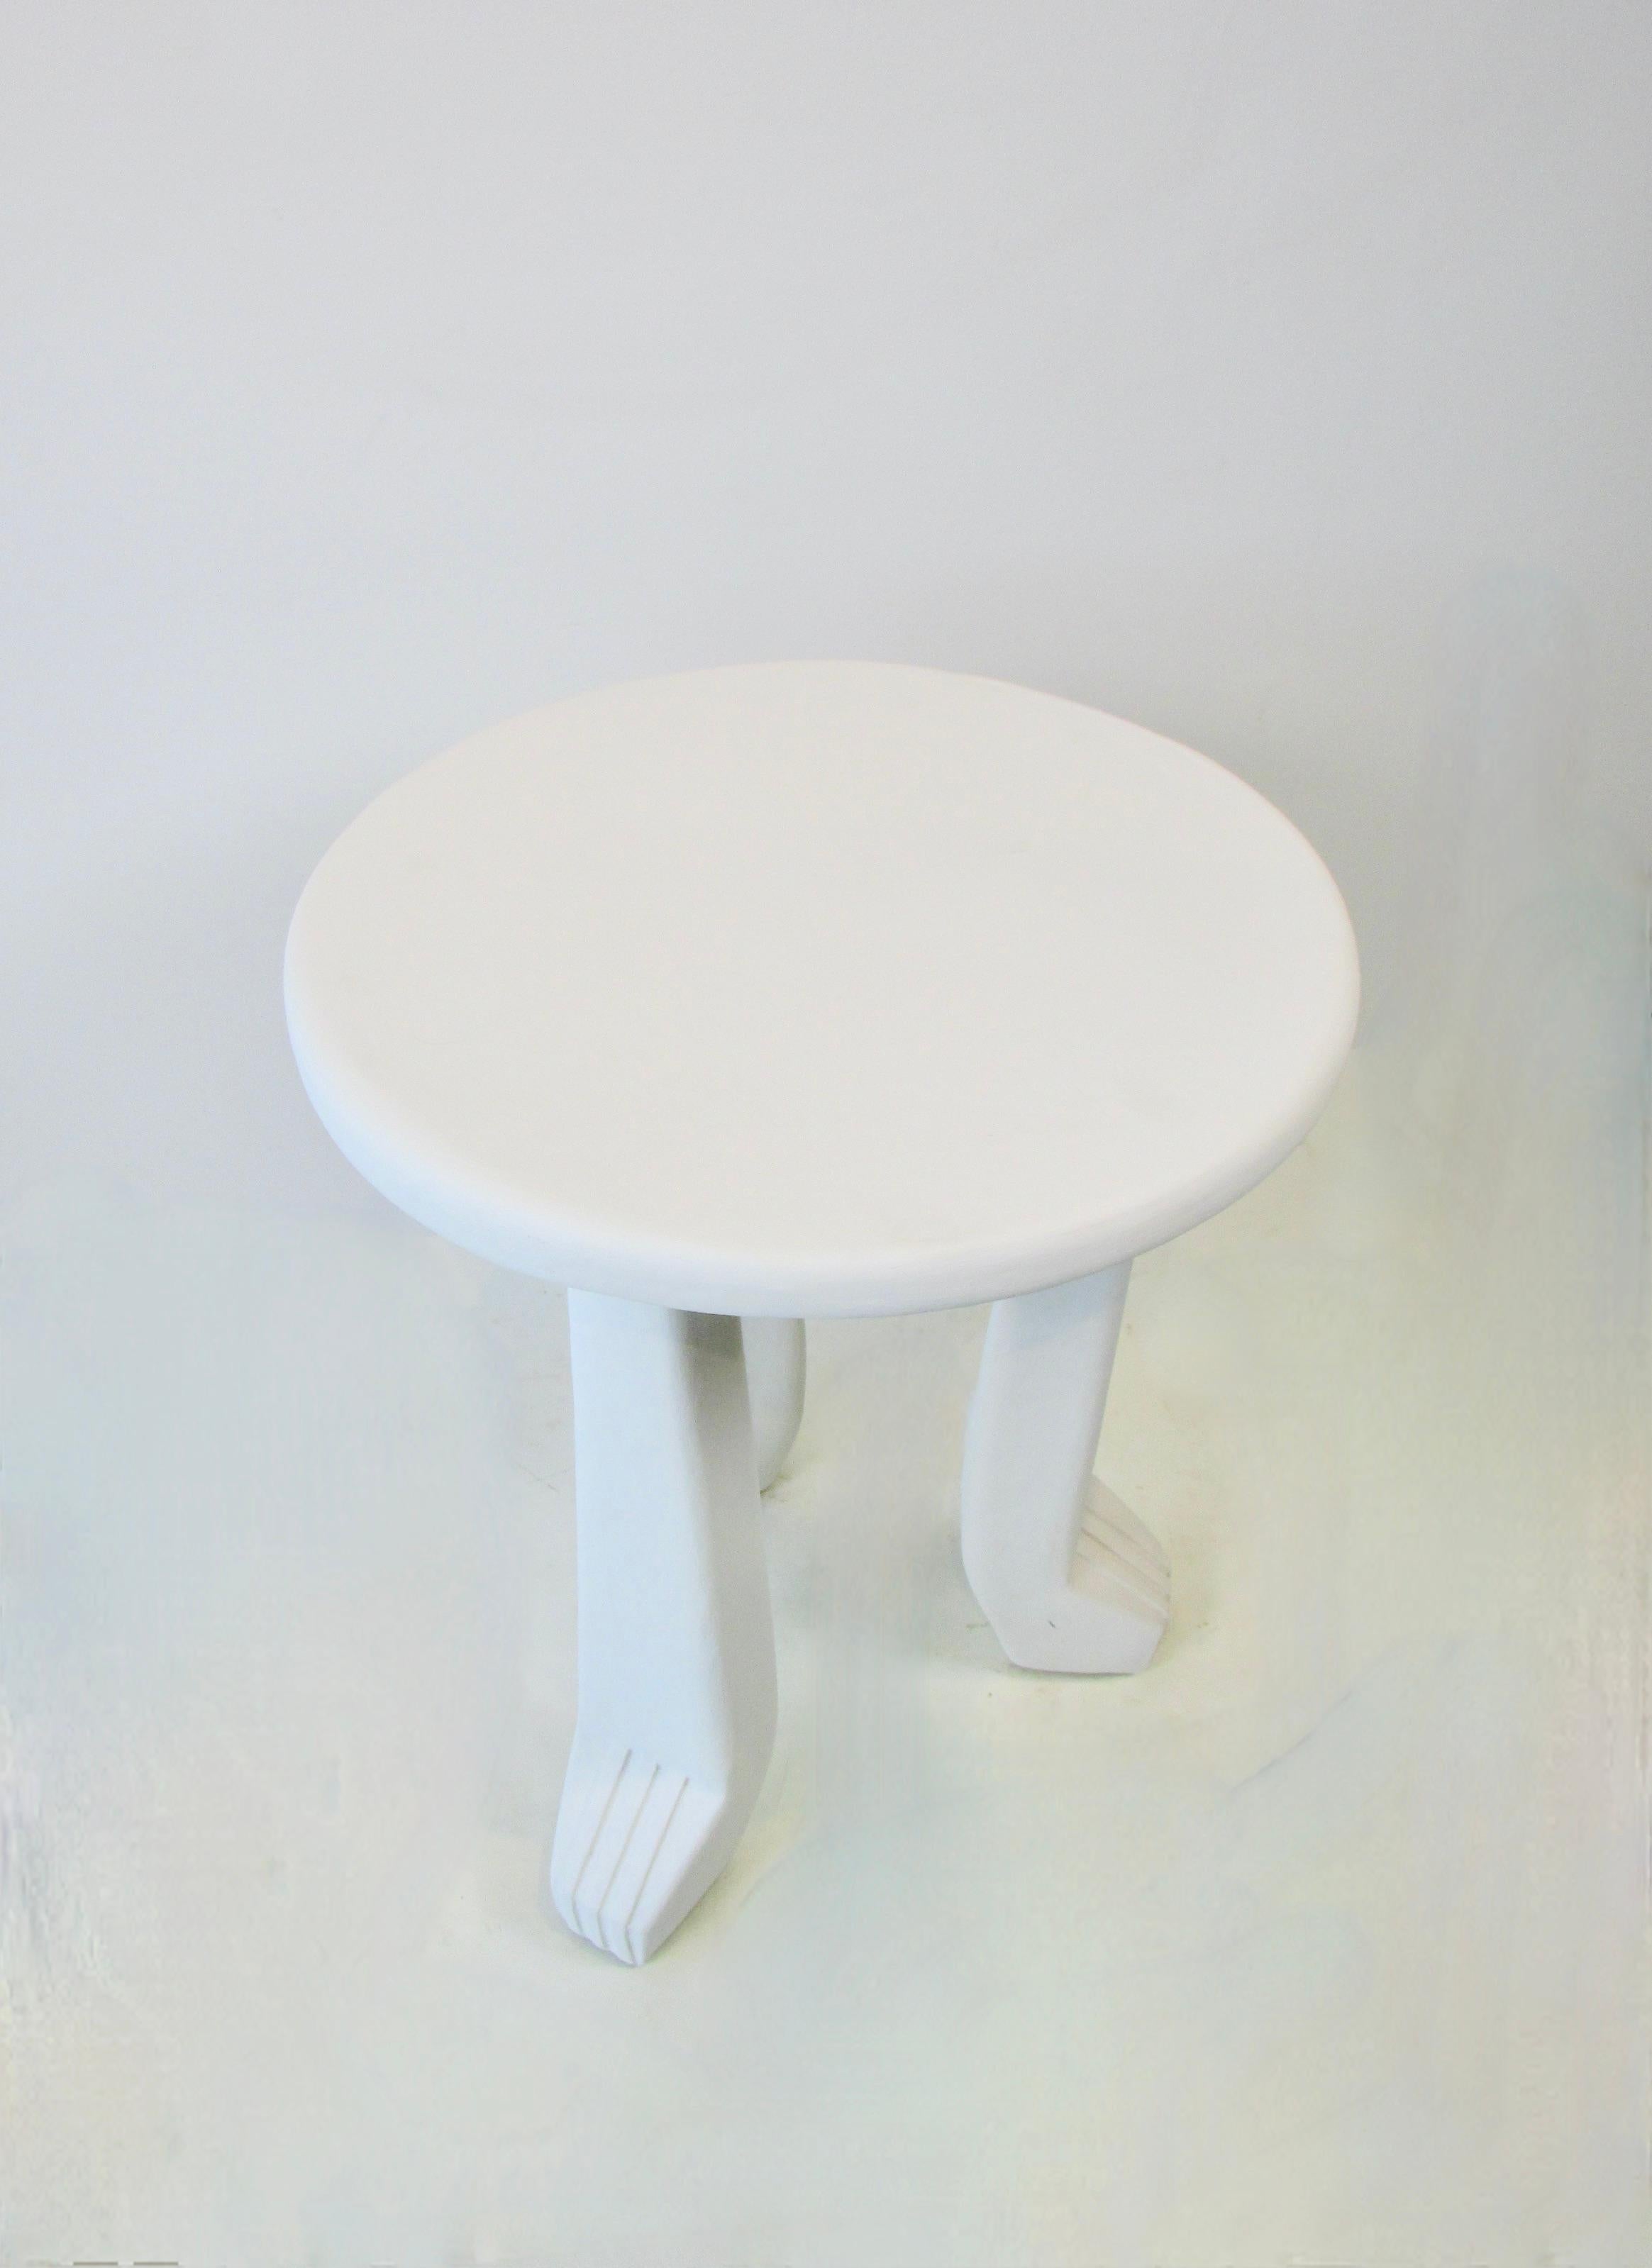 Painted plaster African table attributed to John Dickinson For Sale 2